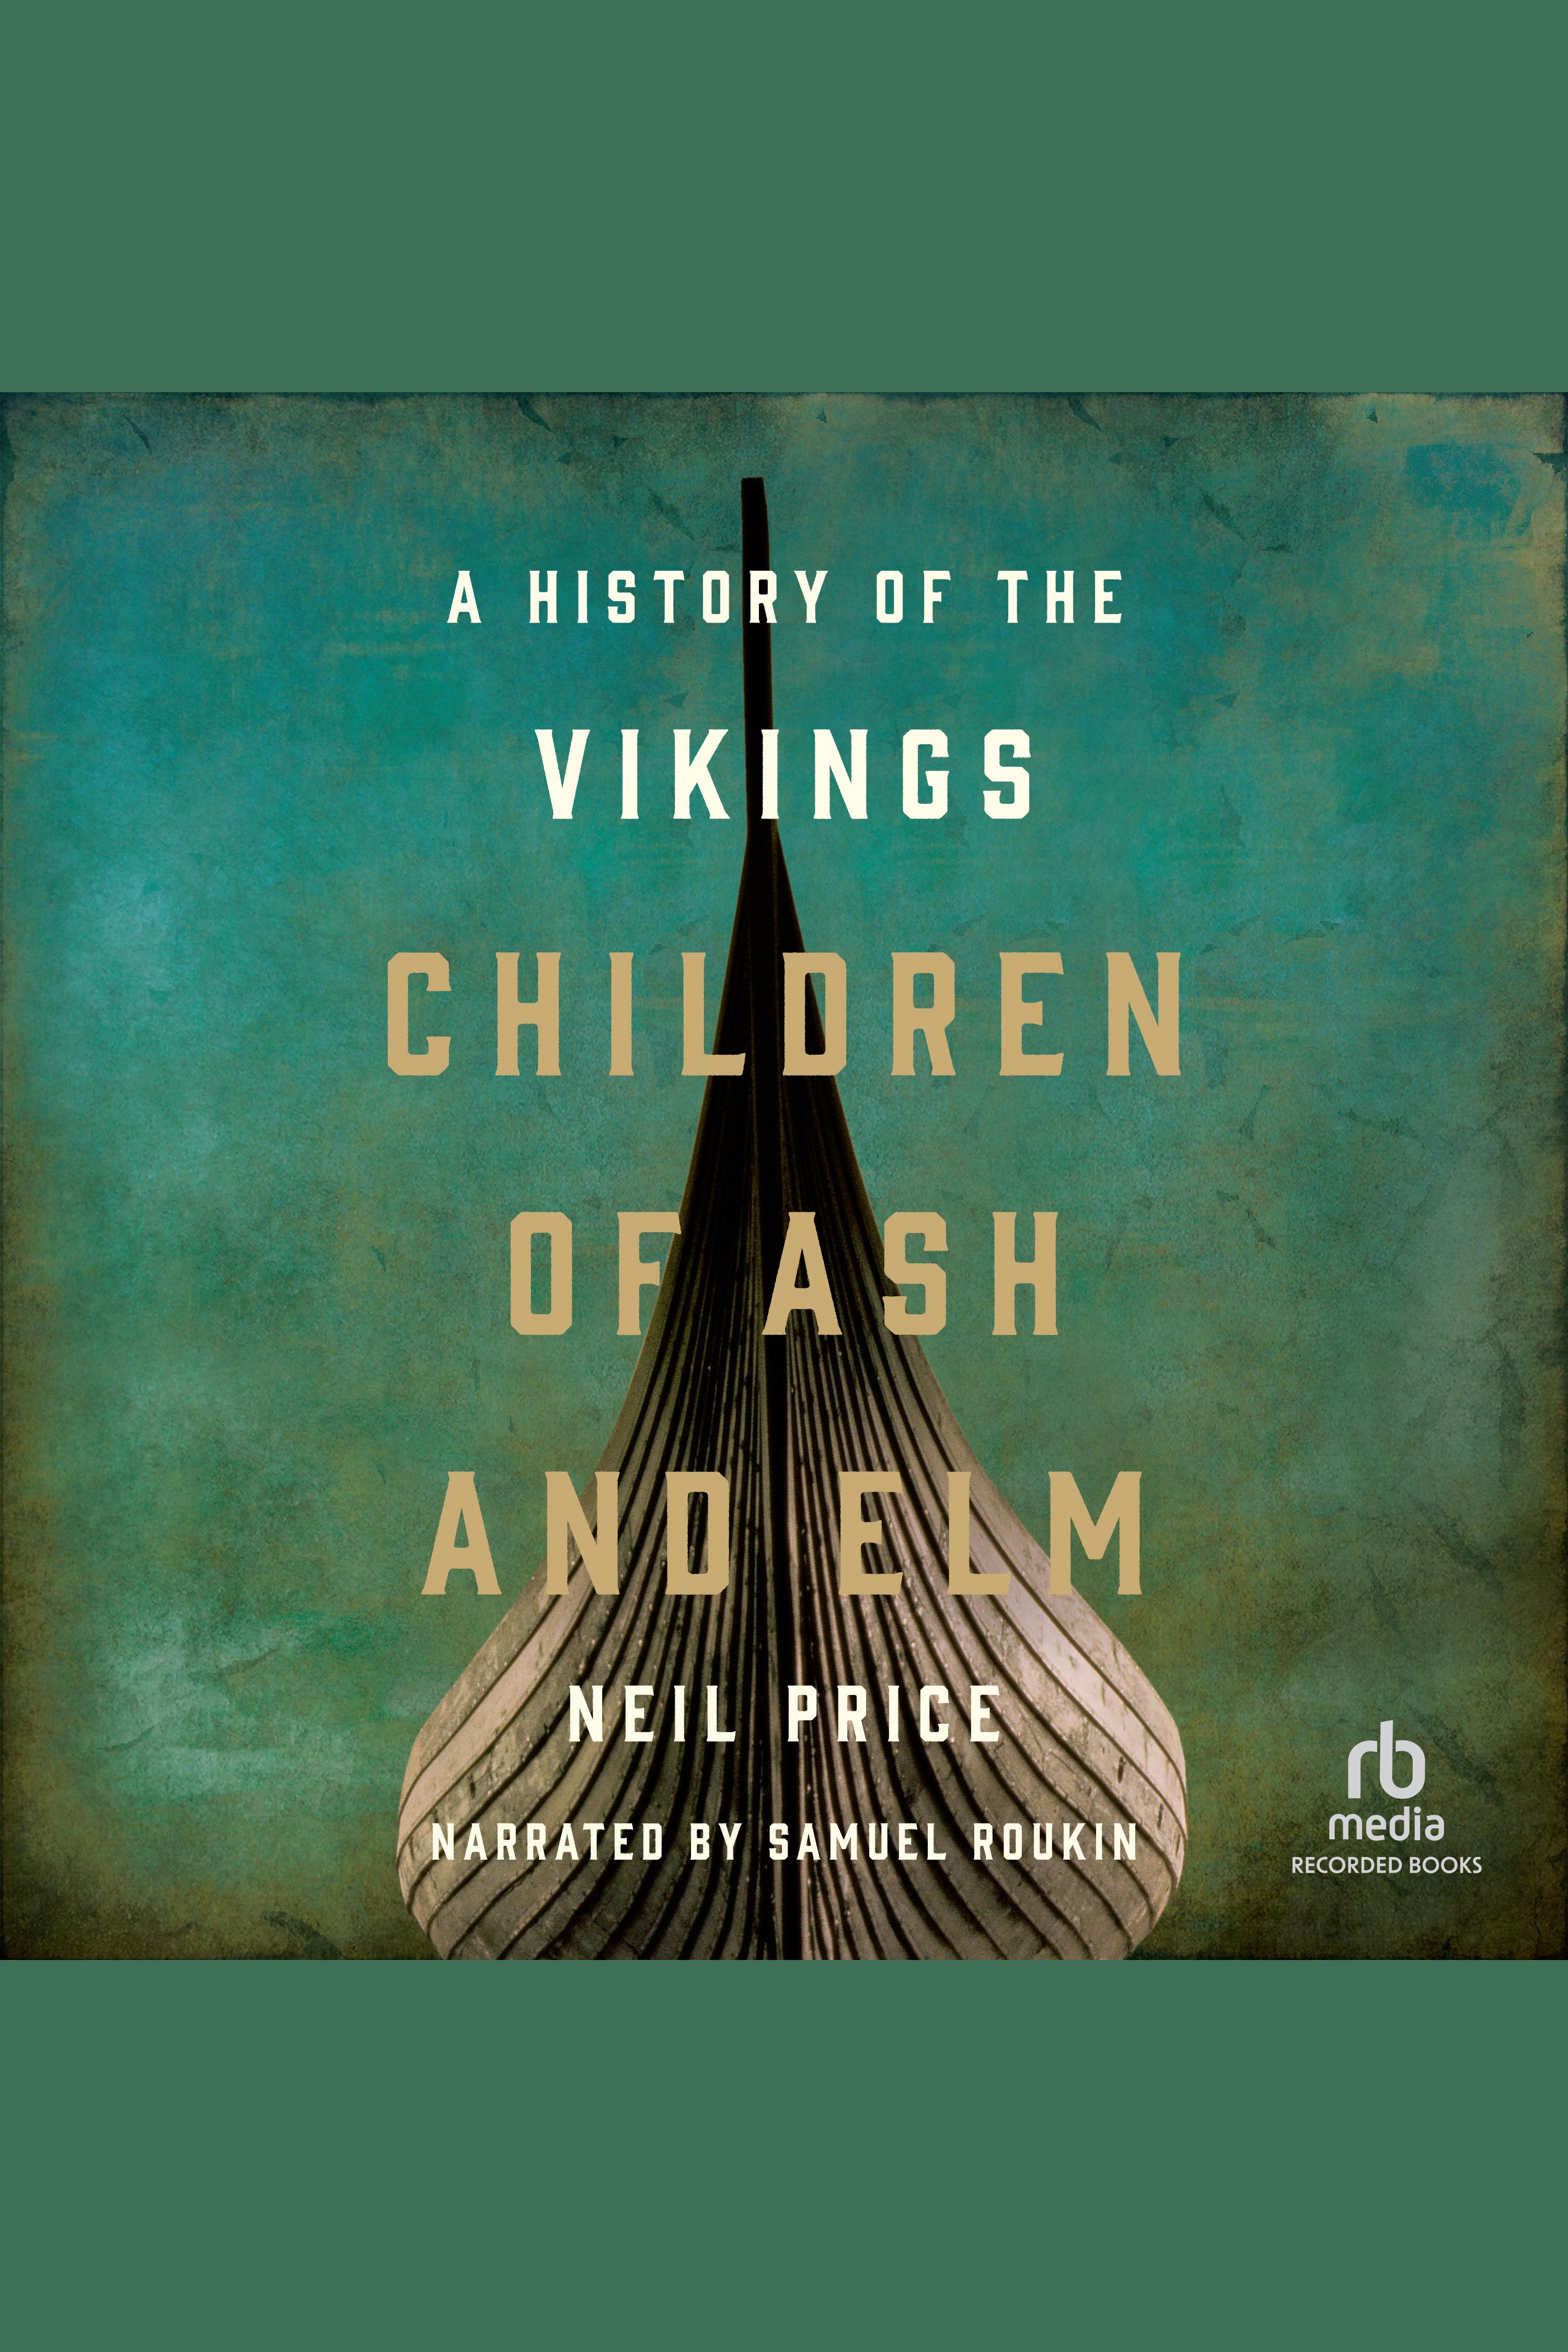 Children of Ash and Elm a history of the Vikings cover image